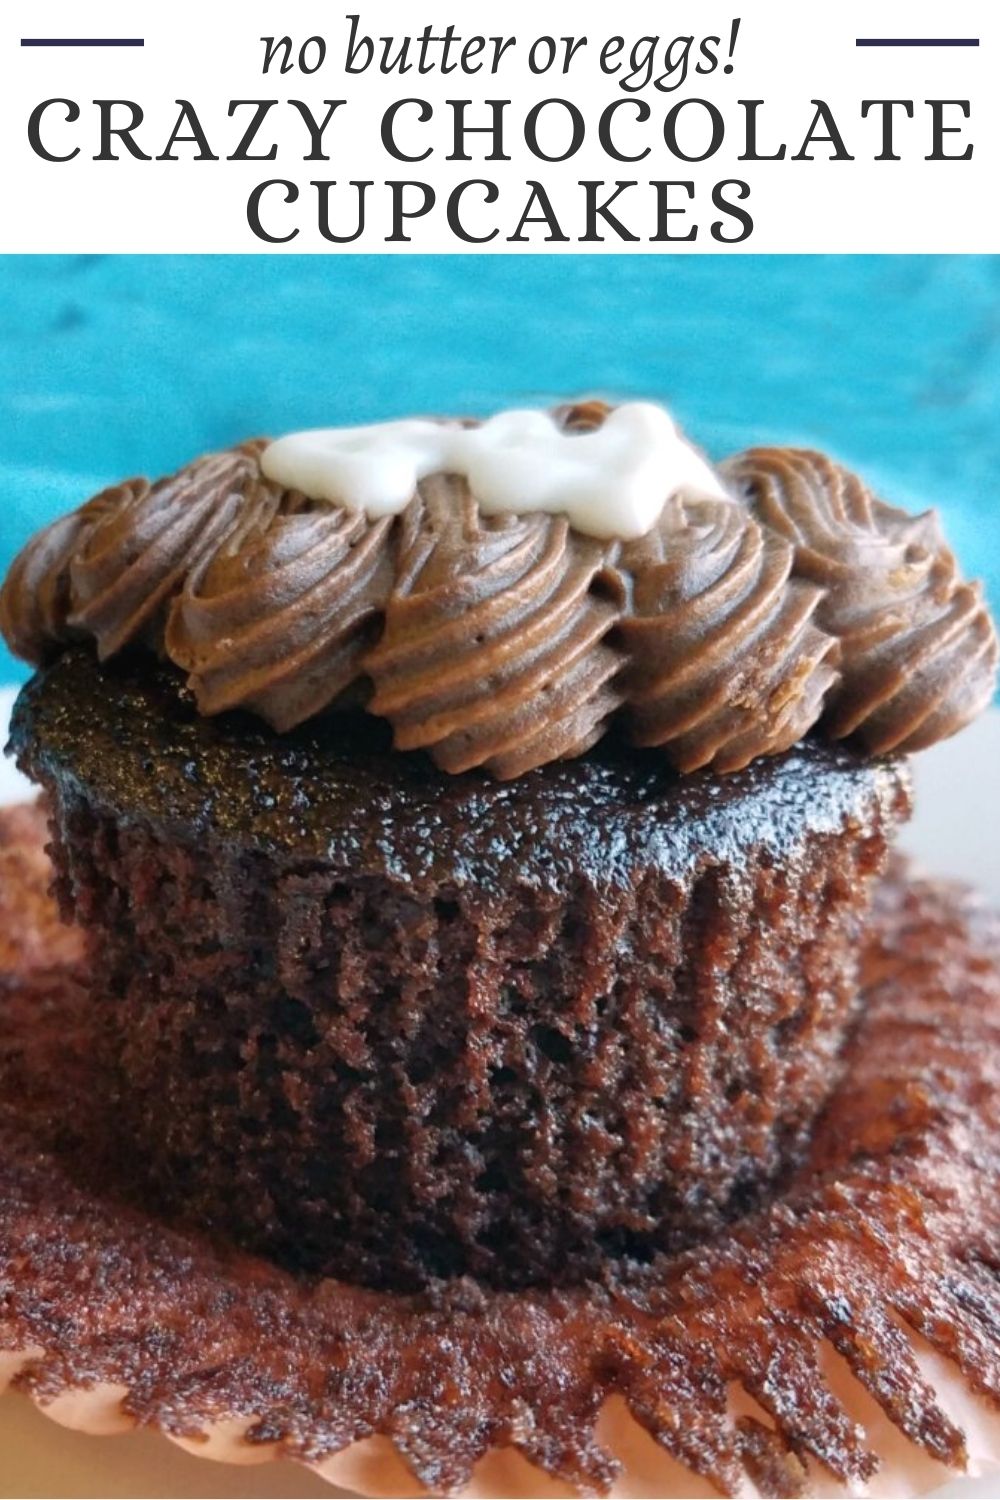 Soft and scrumptious chocolate cupcakes that are easy to make and have a rich chocolate flavor. These chocolate depression cupcakes are going to become an instant favorite in your family like they did in ours. The hardest part will be deciding which frosting to top them with!